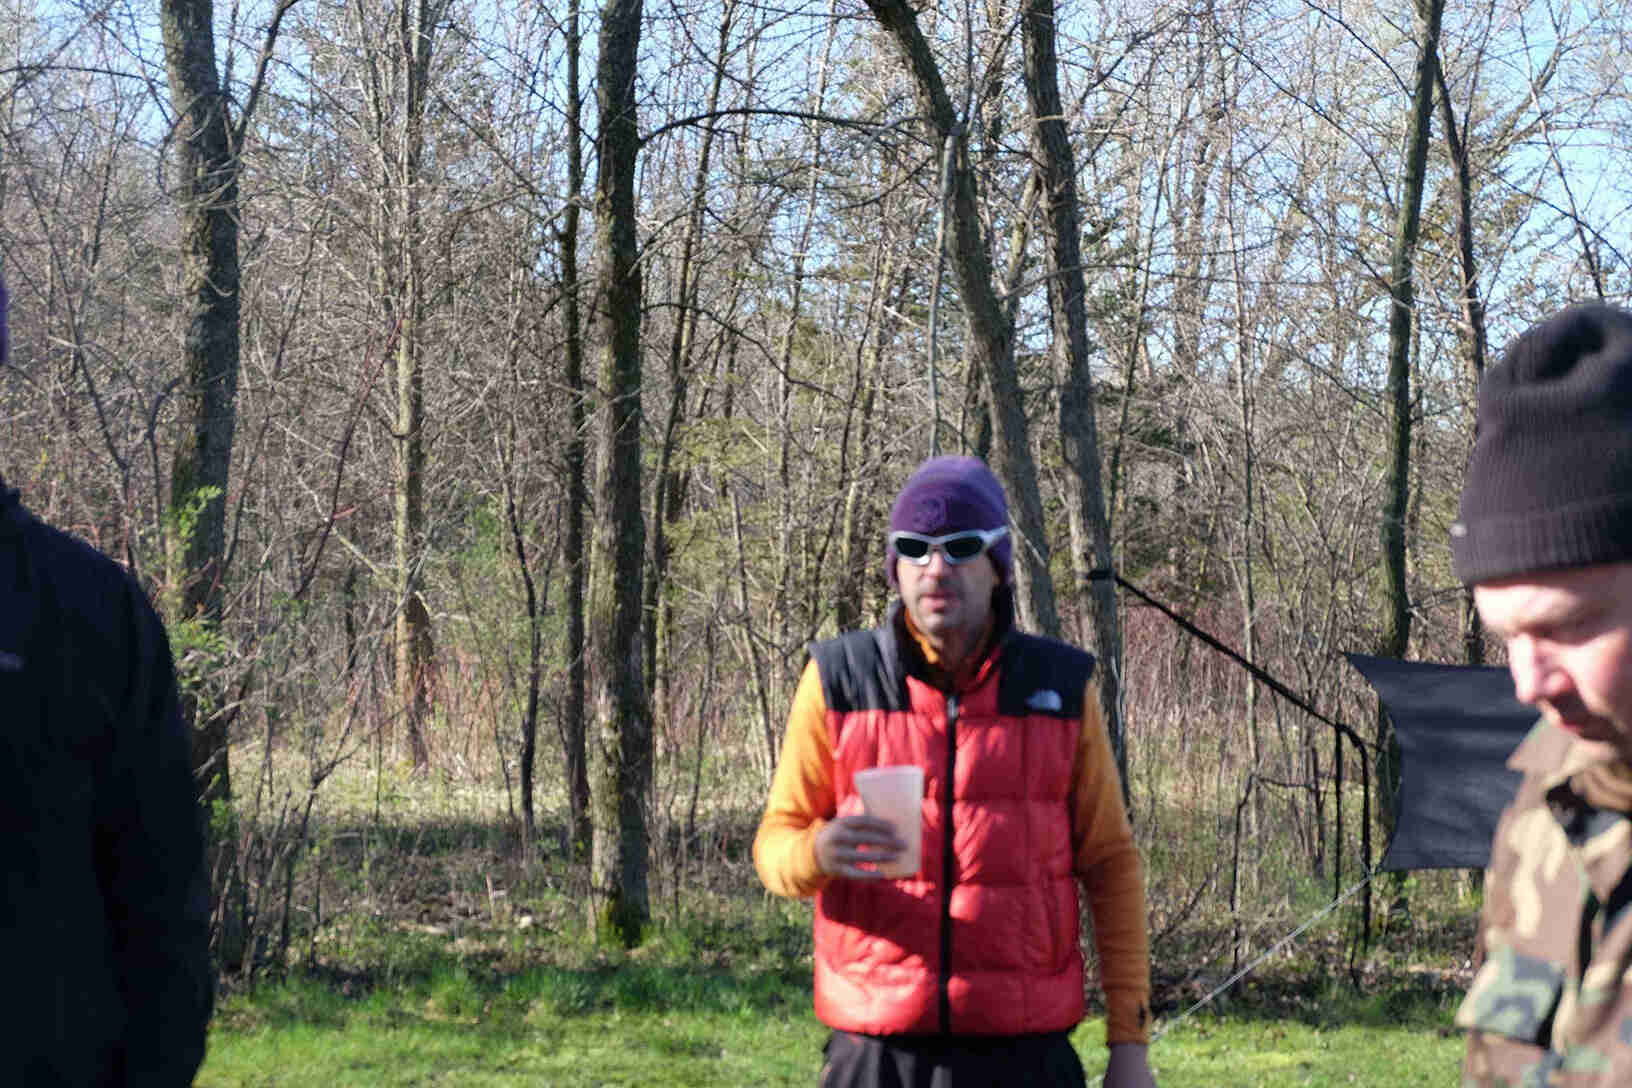 Front view of a person holding a plastic cup, wearing sunglasses, stocking cap and a vest, with trees in the background